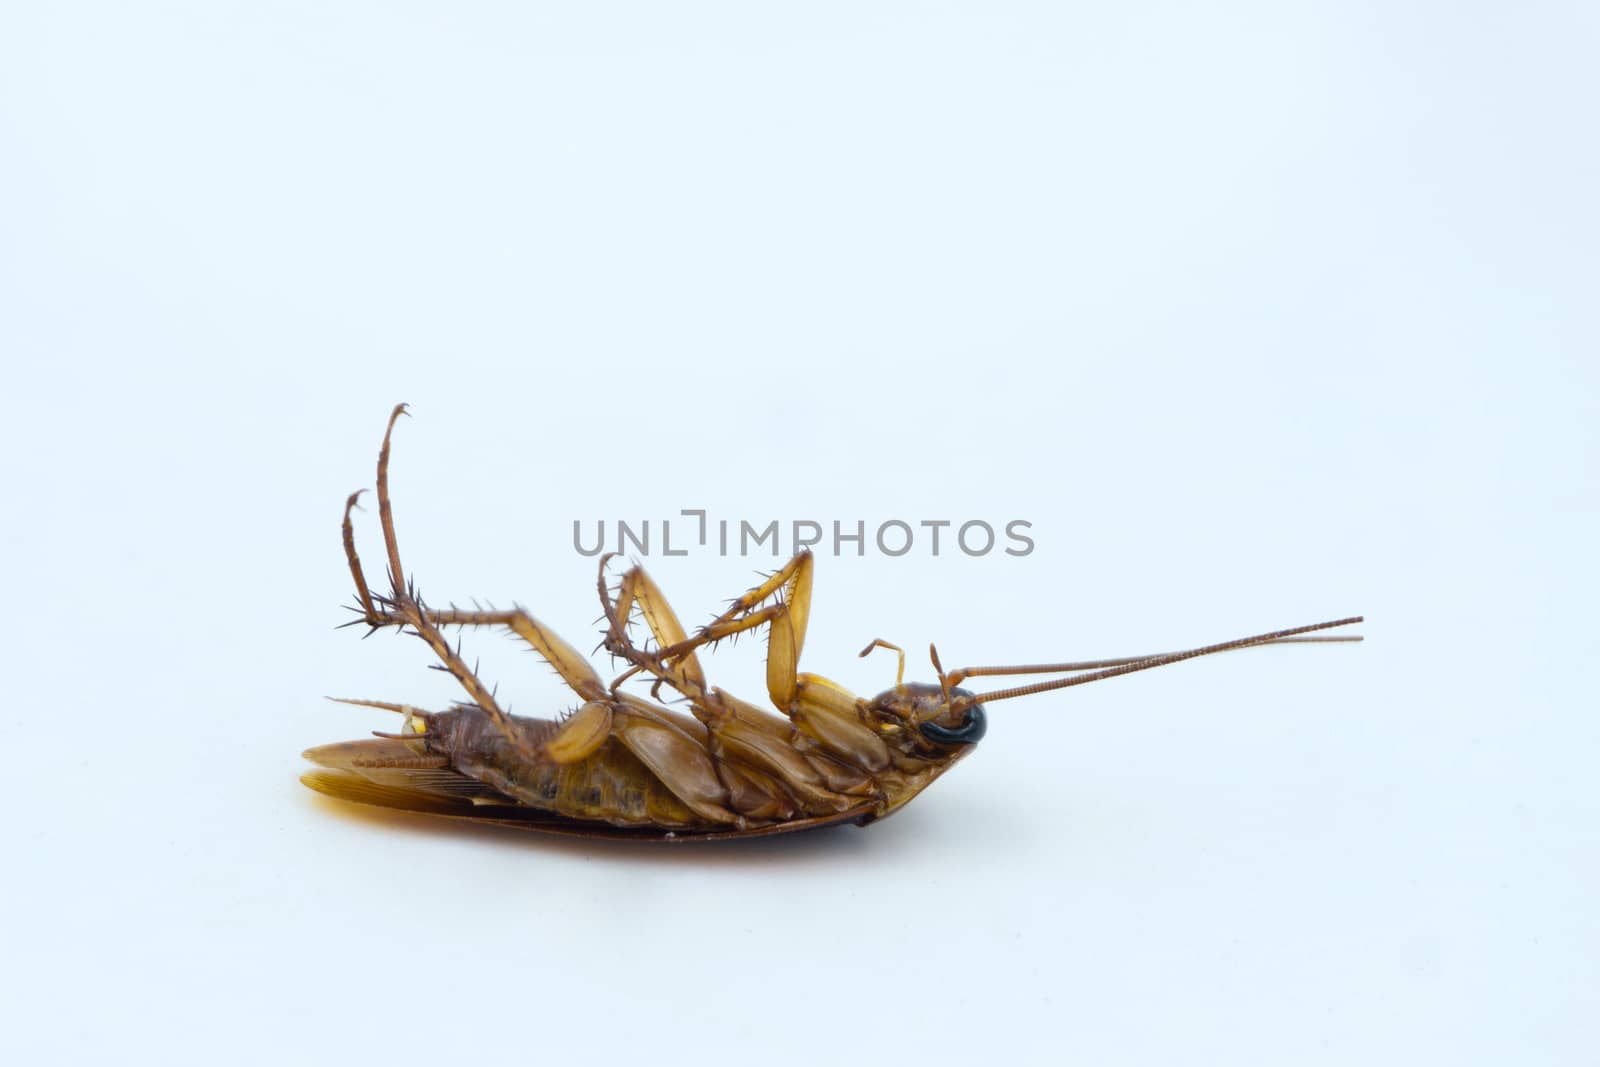 Isolated dead Asian Cockroaches on white background by pkproject